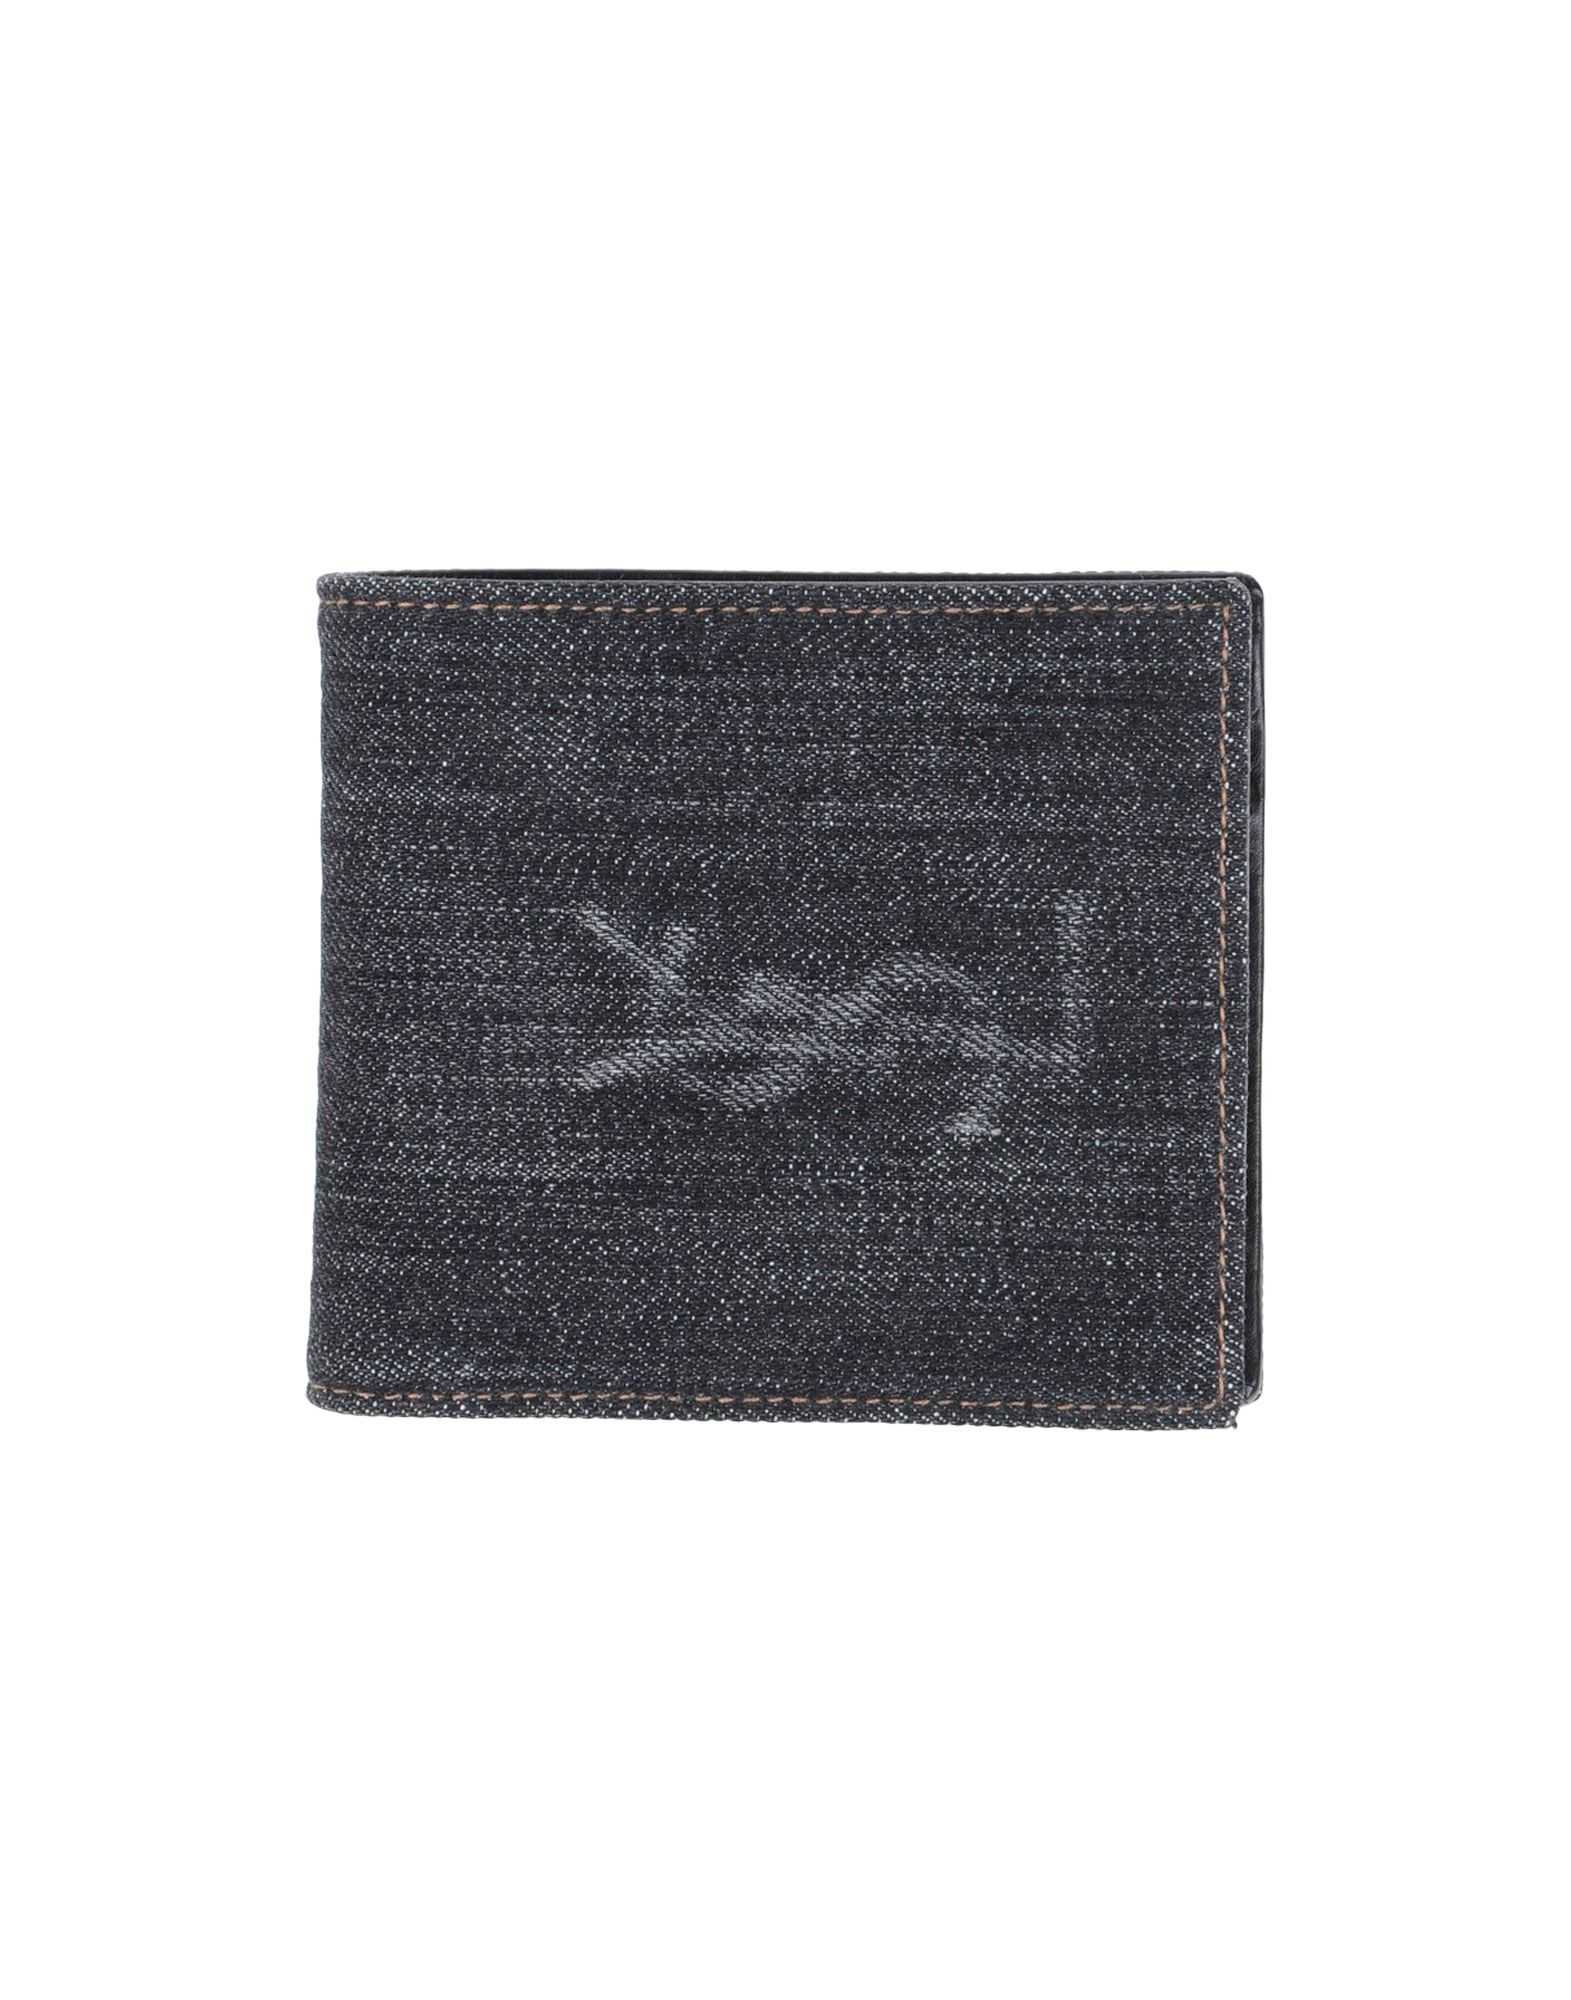 ysl wallet from the rive gauche collection  